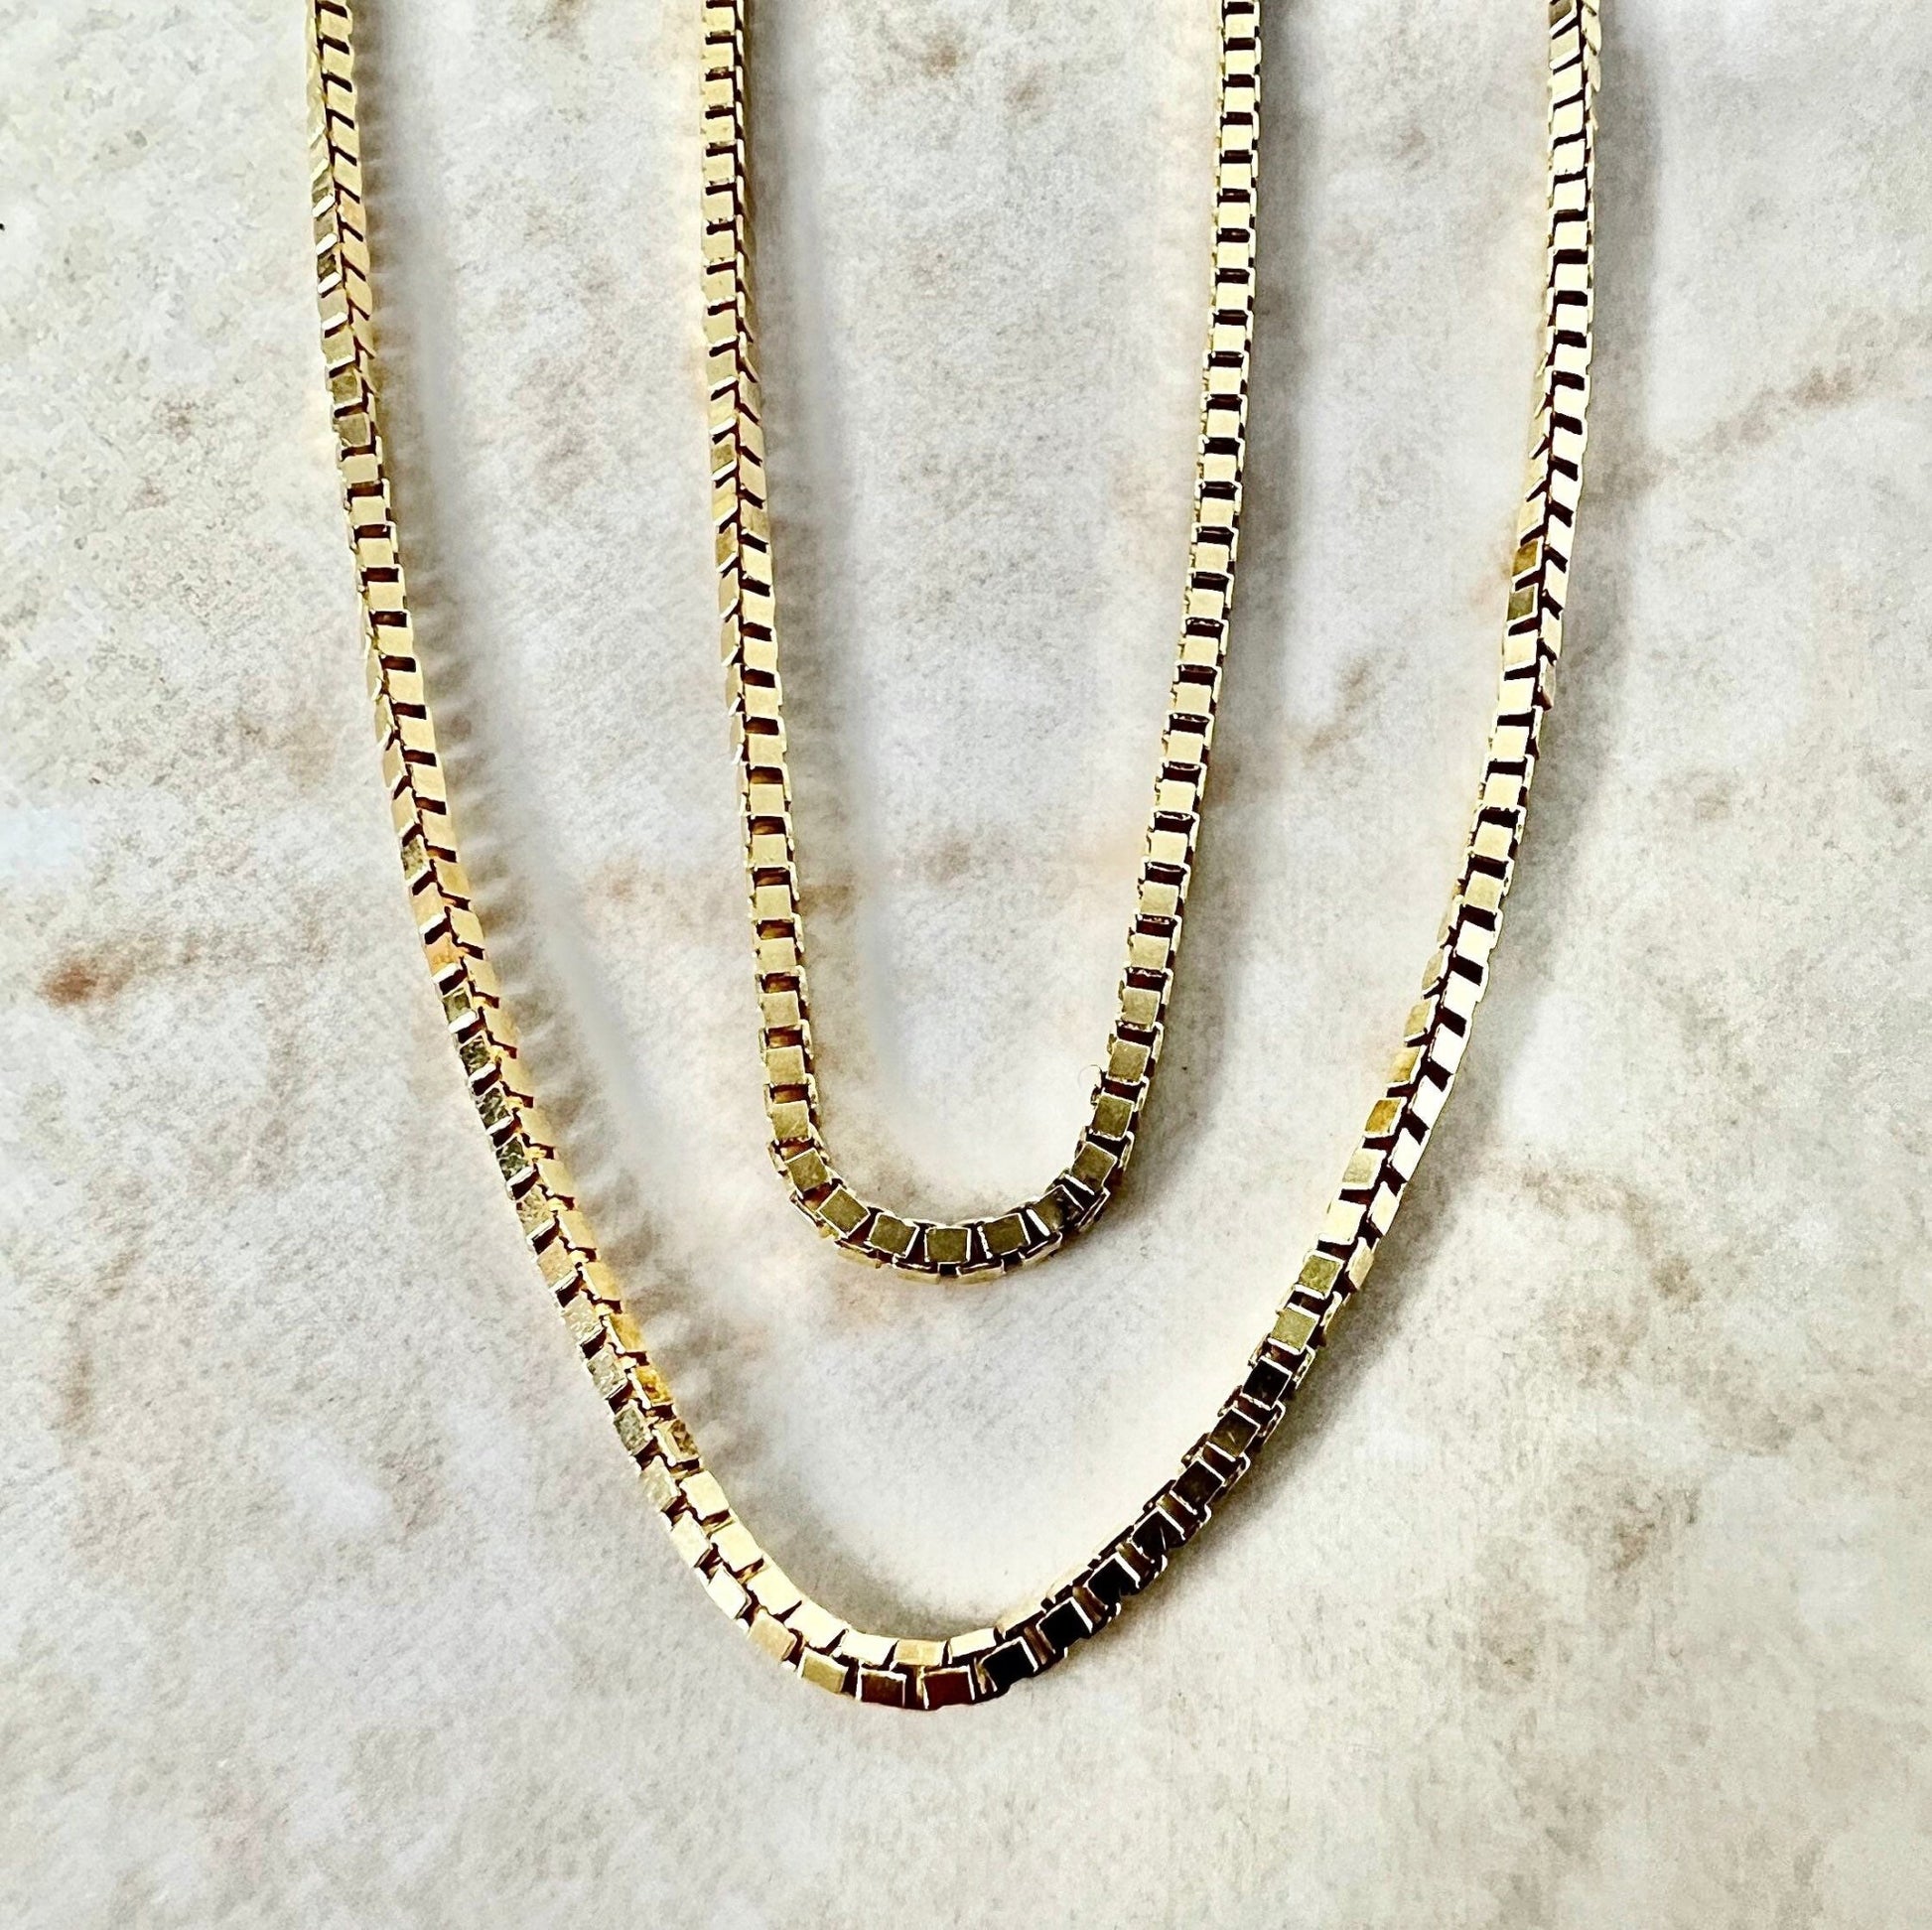 Chain Necklace in Yellow Gold, 18